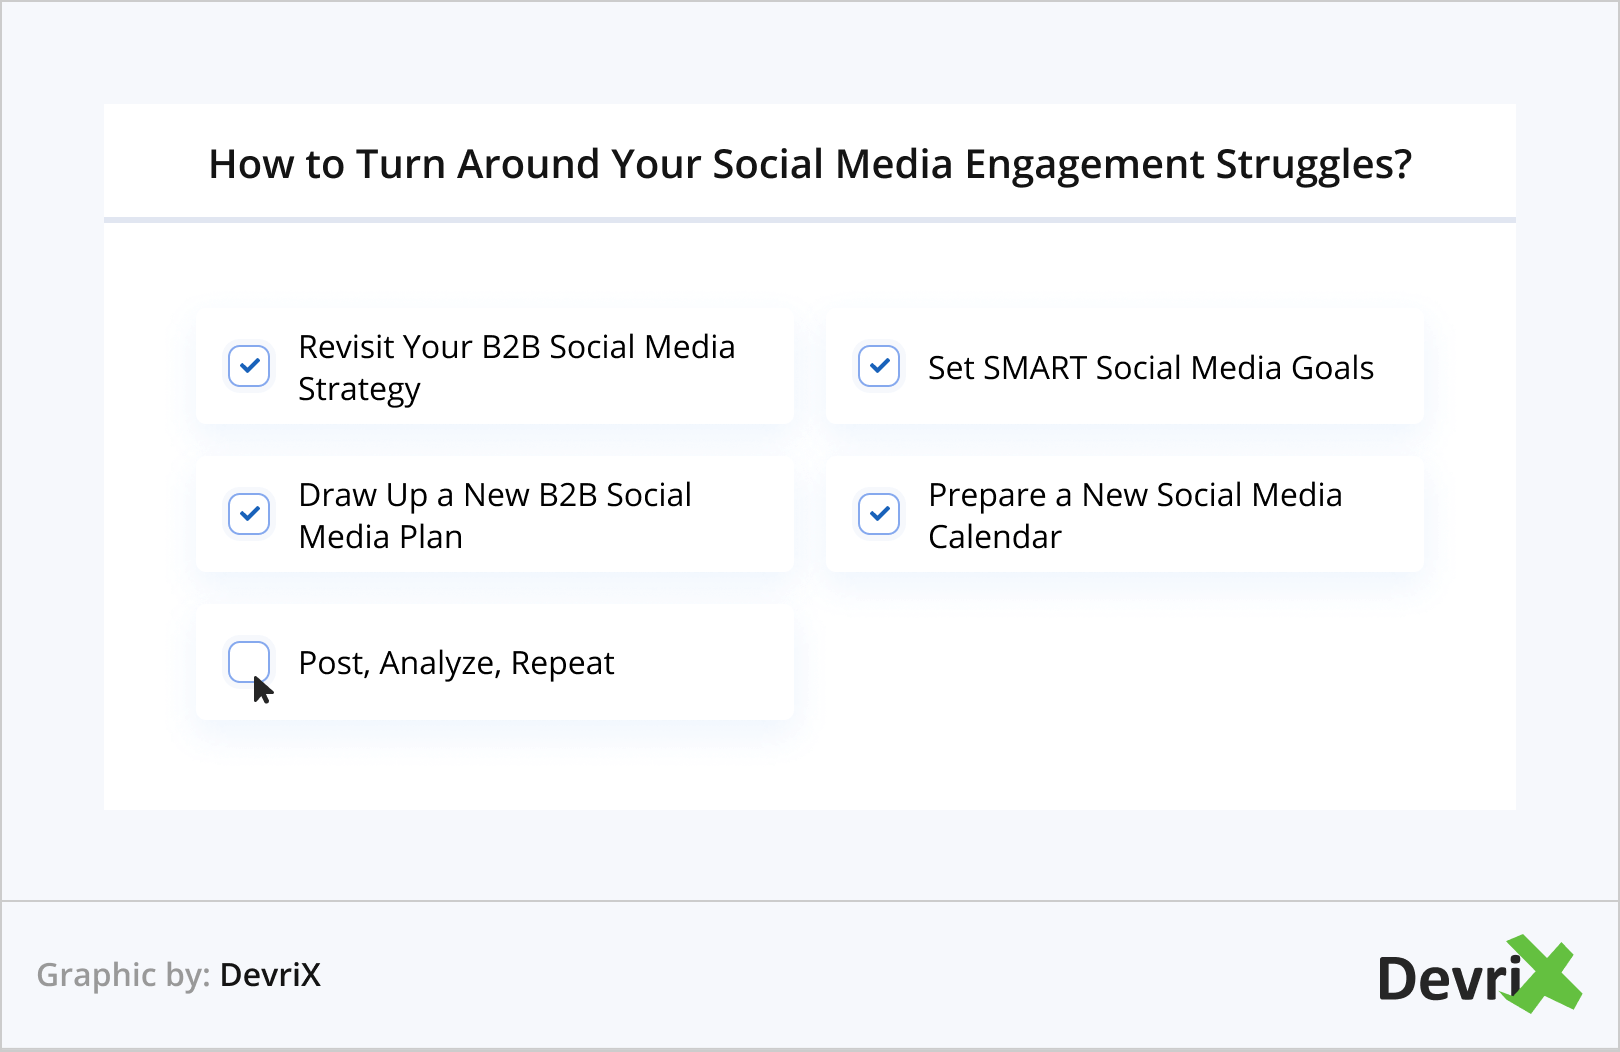 How to Turn Around Your Social Media Engagement Struggles